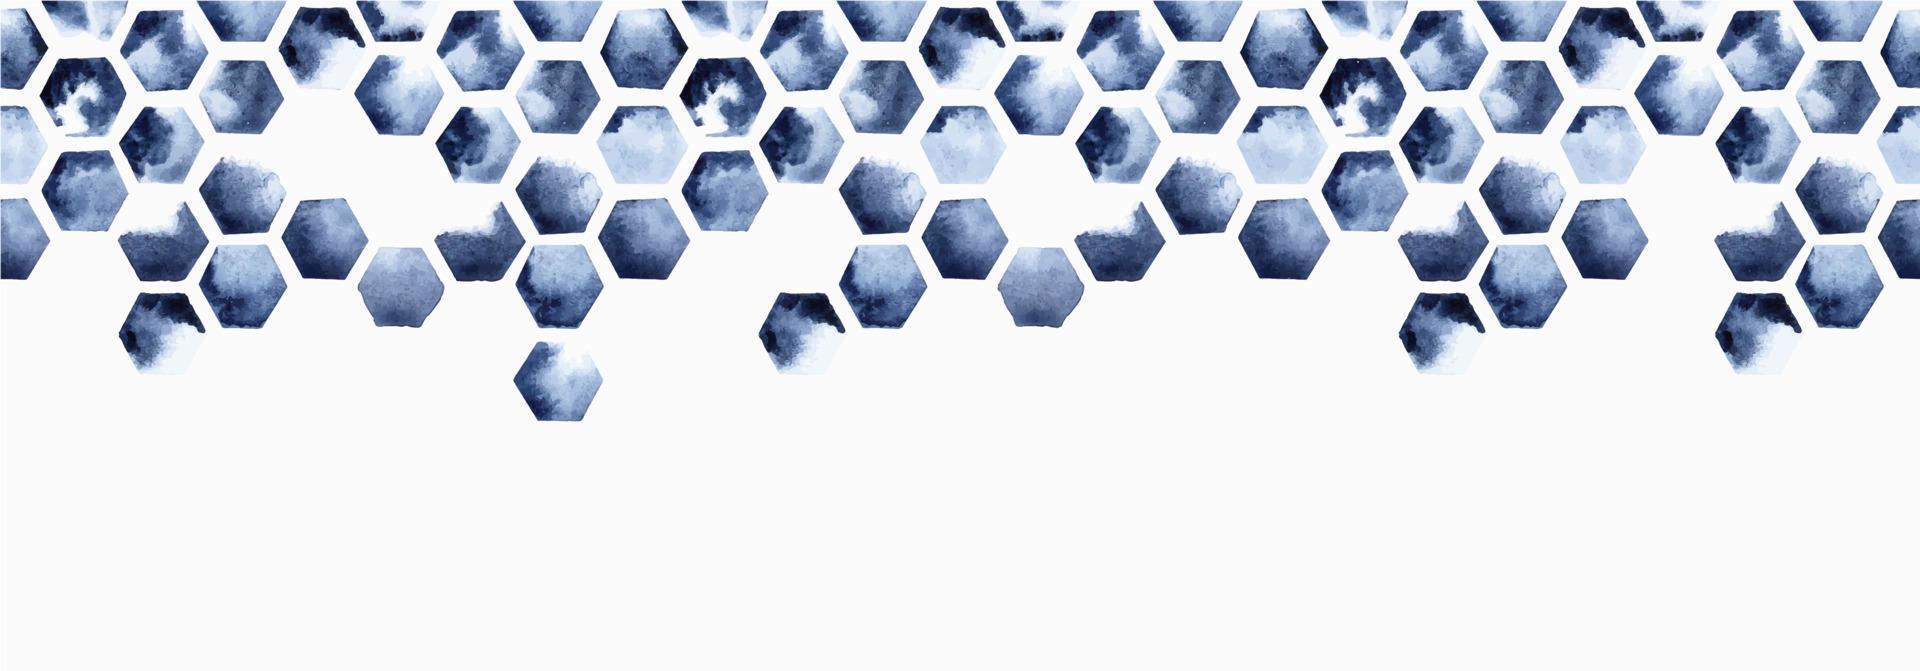 watercolor illustration seamless border, hexagonal tile pattern. bee honeycomb, indigo blue on a white background. abstract print with paint spots. vector